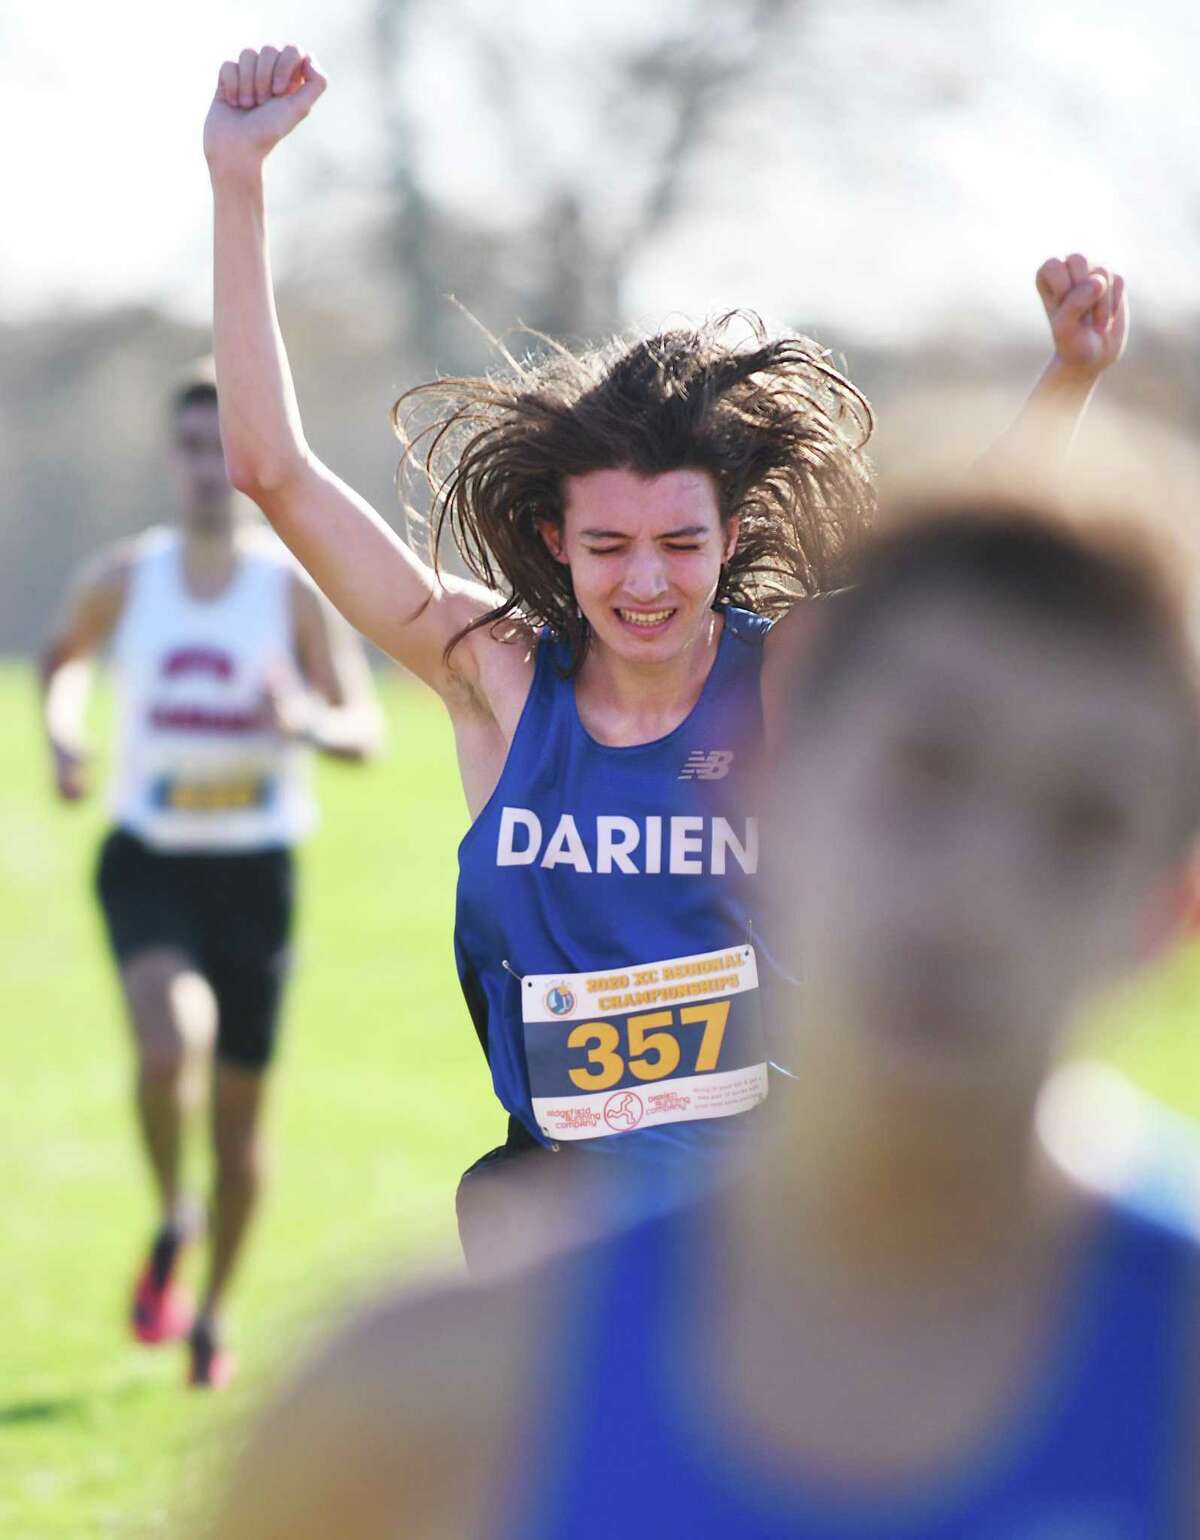 Darien's Evan O'Rourke crosses the finish line with a time of 17:08 to take fourth place in the West Region heat of the FCIAC boys cross country championship at Waveny Park in New Canaan, Conn. Wednesday, Nov. 4, 2020.